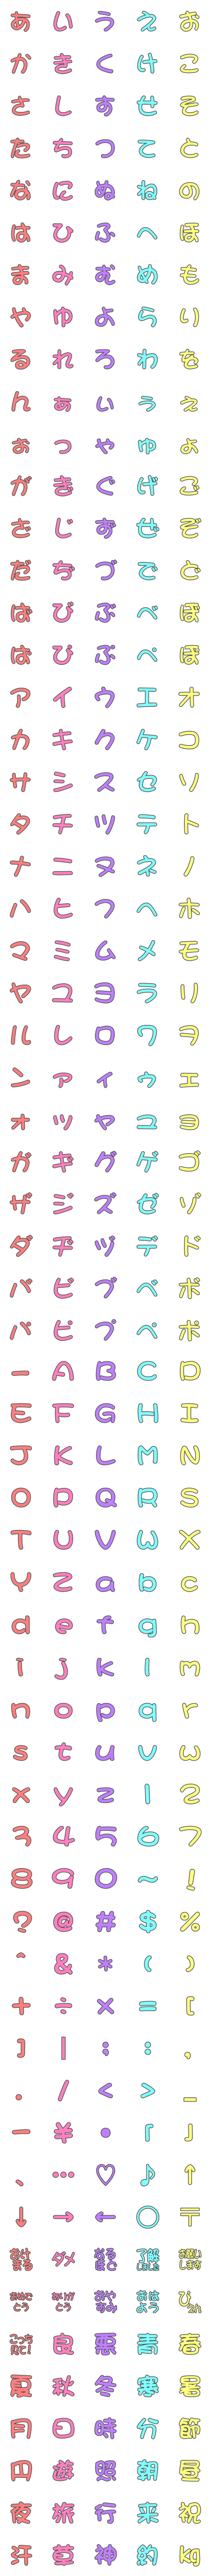 [LINE絵文字]DFまるもじ体 フォント絵文字の画像一覧